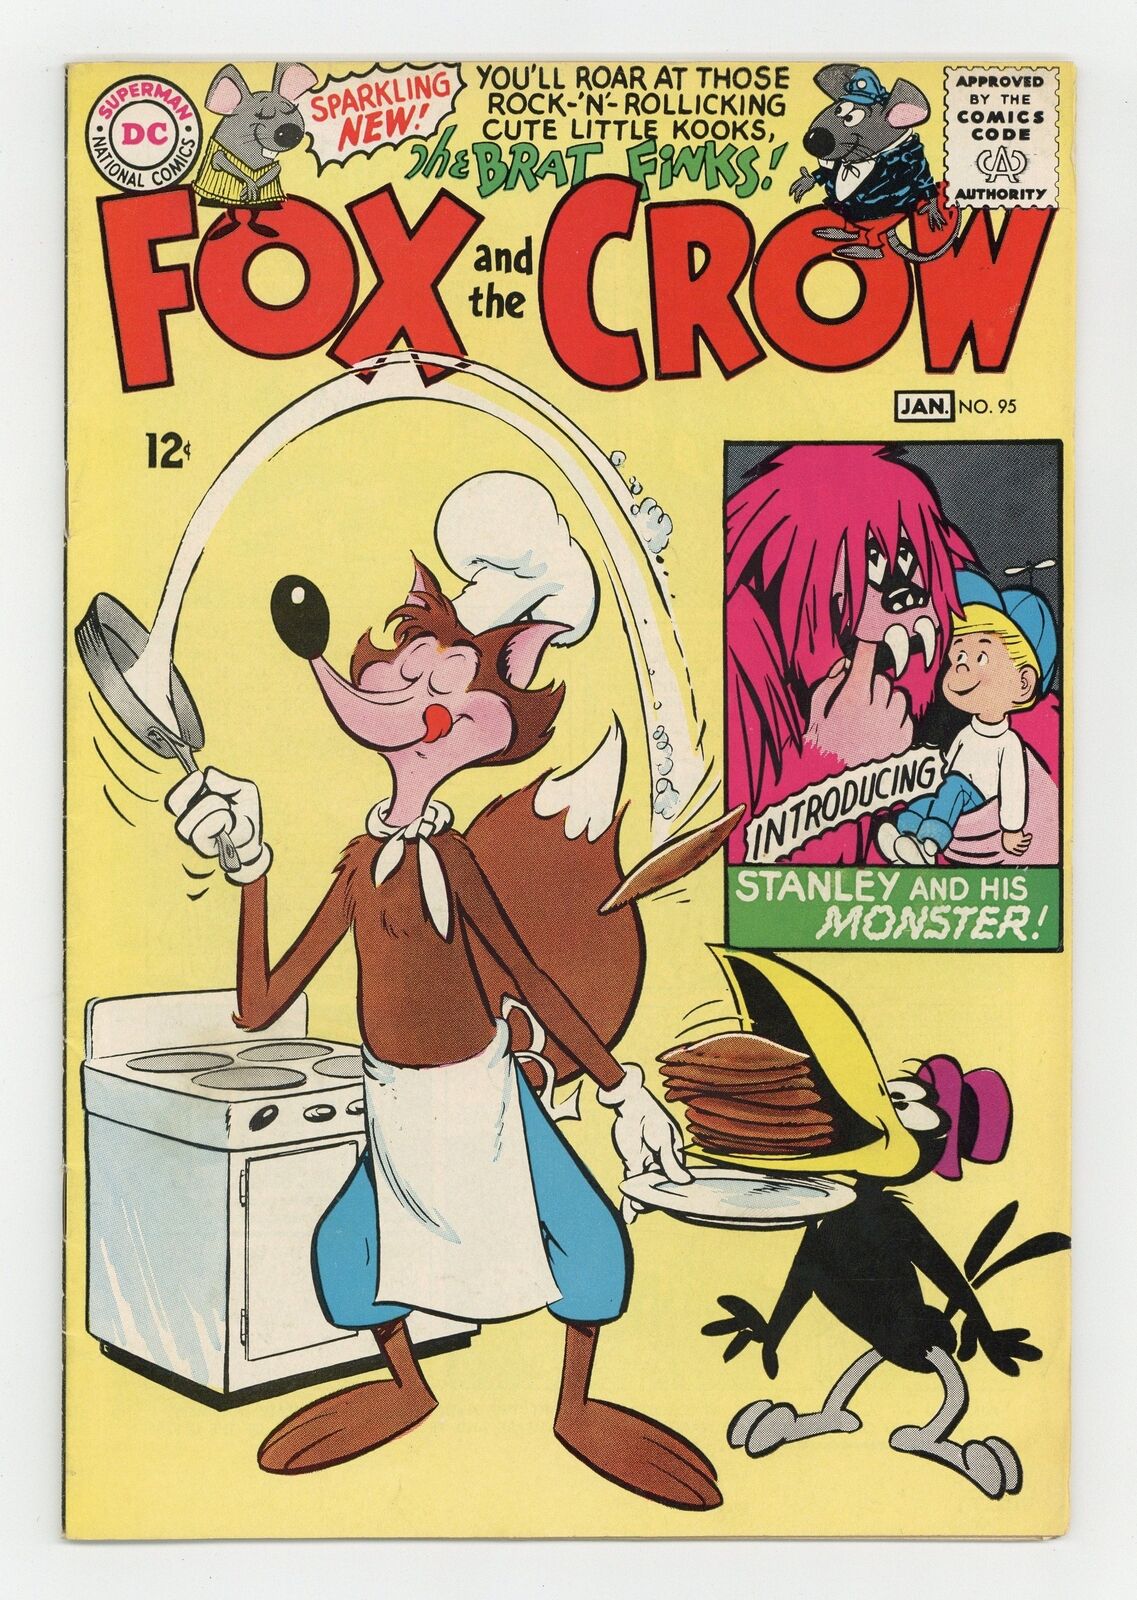 Fox and the Crow #95 VG/FN 5.0 1965 1st app. Stanley & His Monster